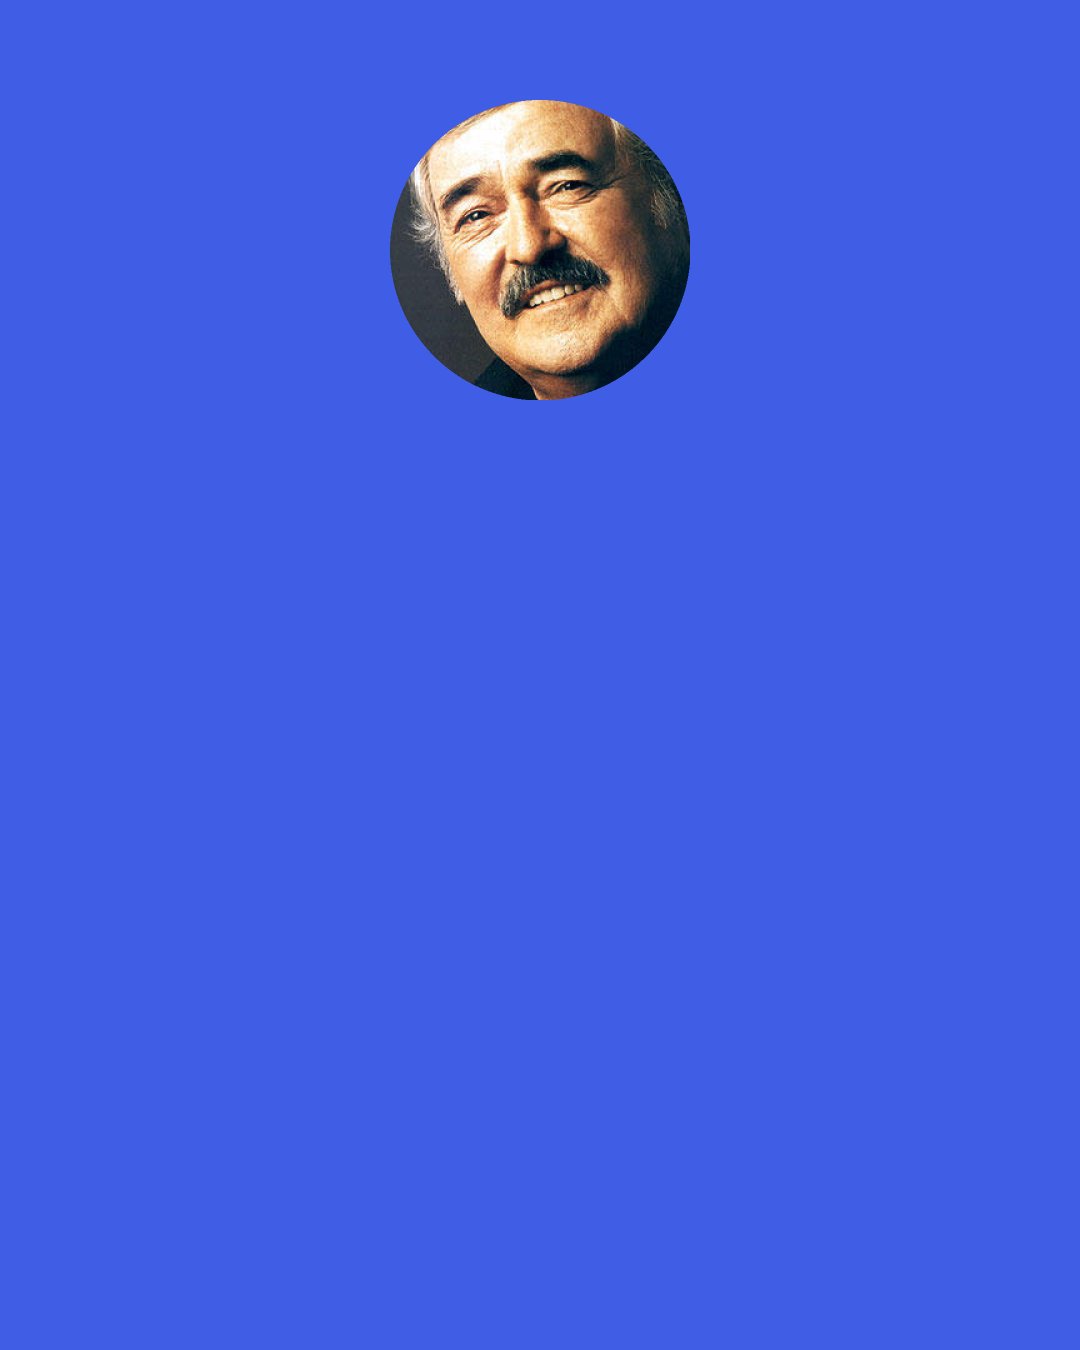 James Doohan: I really didn`t have to work, shall we say, with "Star Trek." It was a natural. When I opened my mouth, there was Scotty. It`s like I tell people what you see in Scotty is 99% James Doohan and 1% accent.